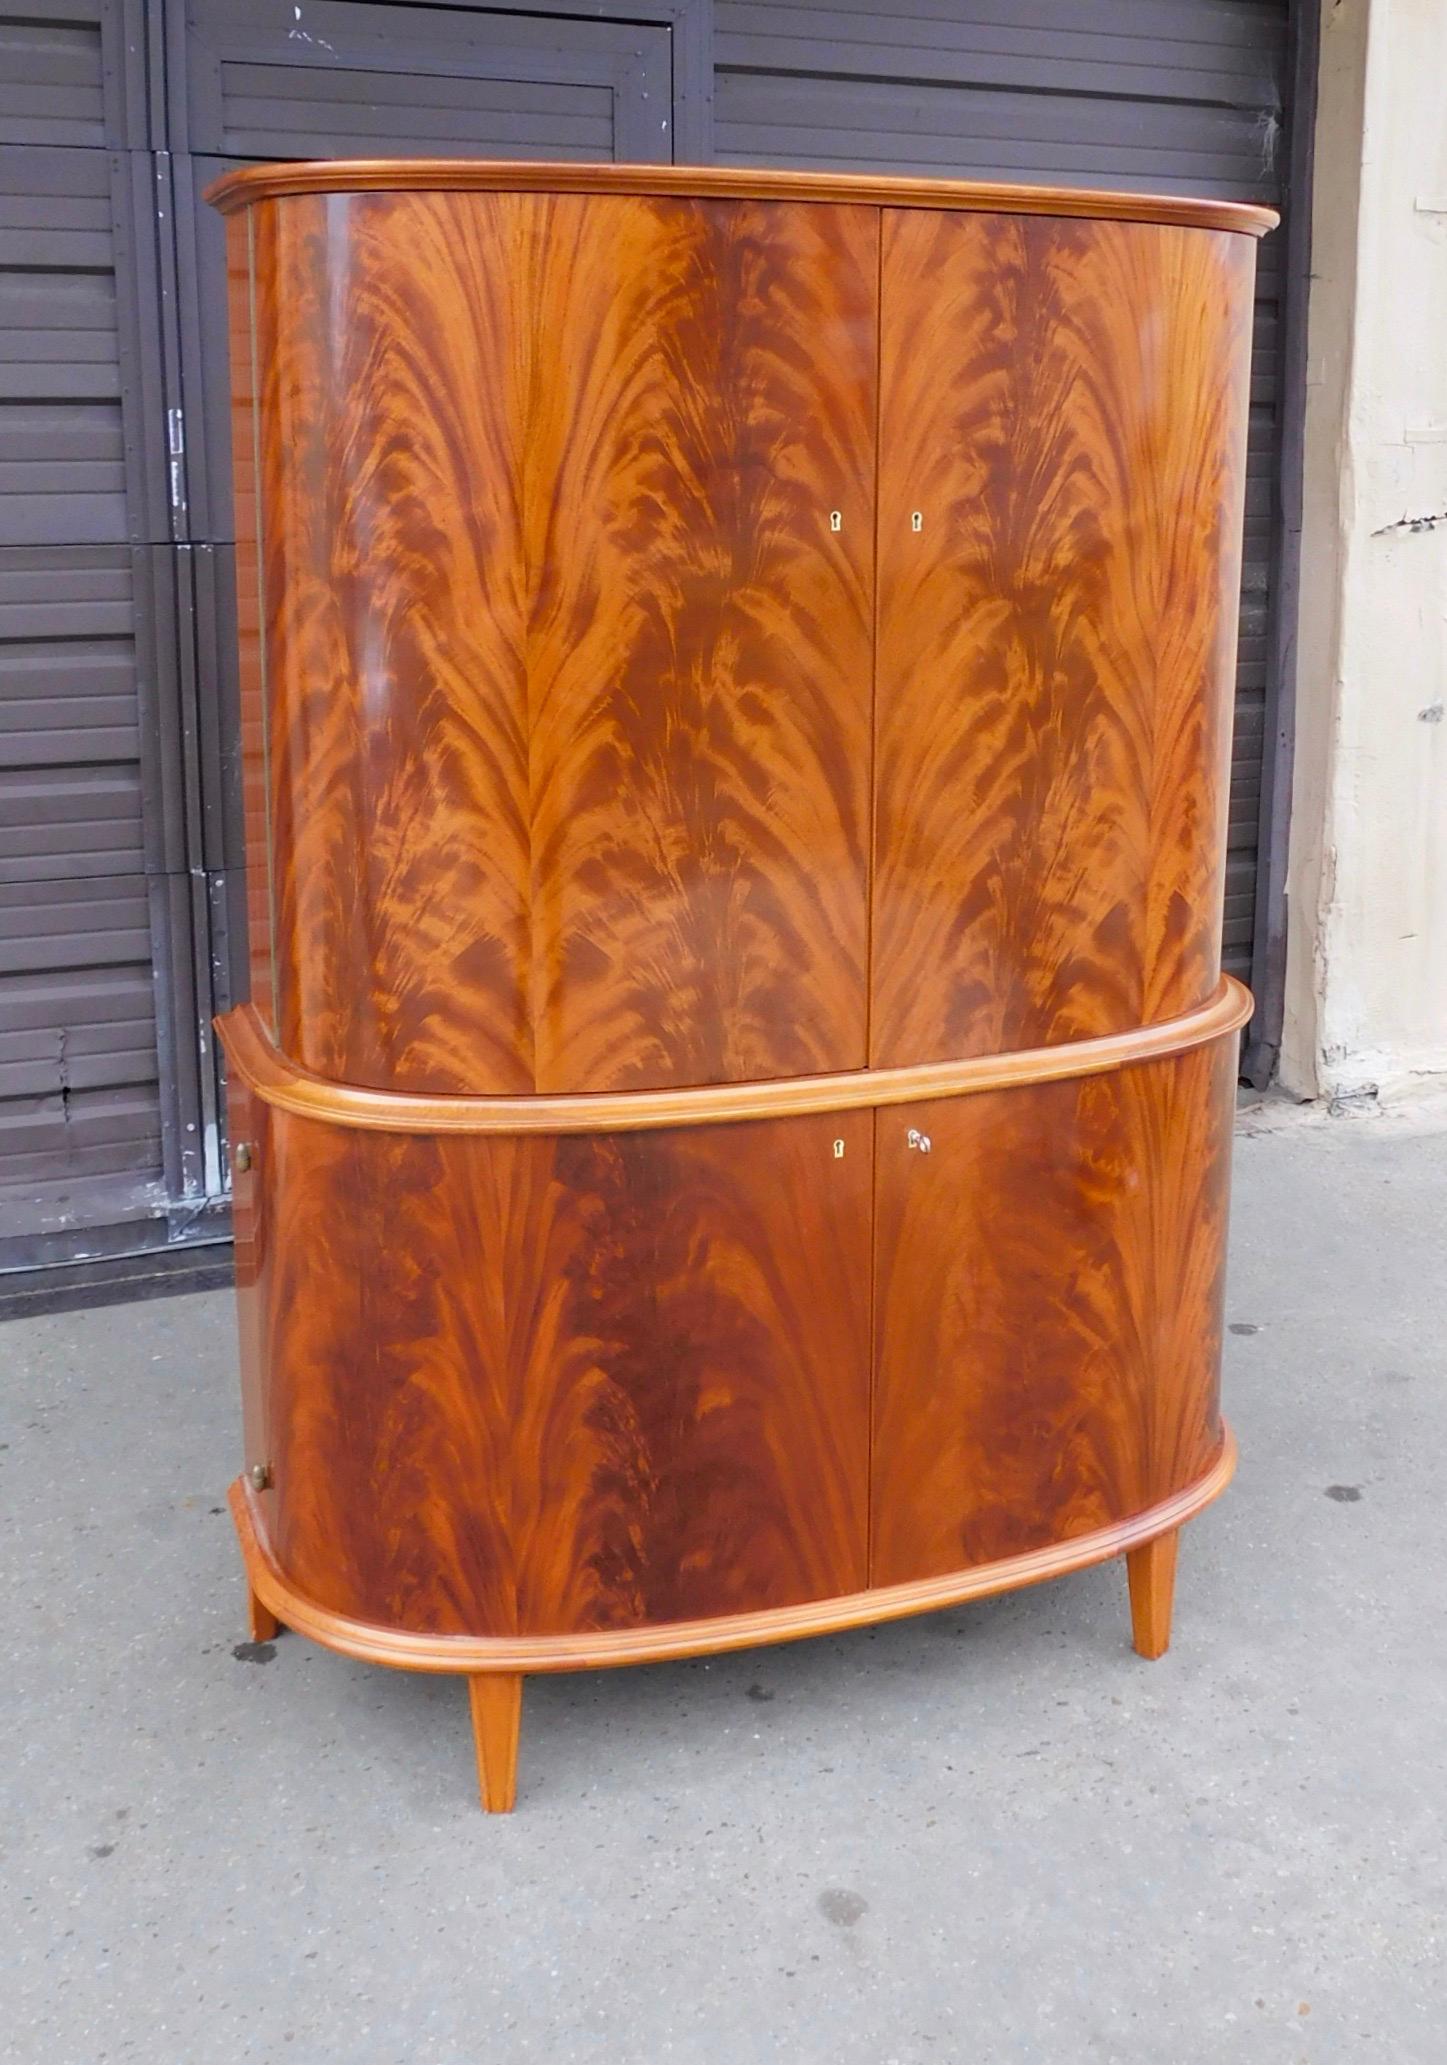 Swedish Art Moderne storage cabinet rendered in highly figured, book matched mahogany.
Interior composed of mahogany and birch woods. In beautiful original condition with some light restoration. Please see detailed photos. With all original